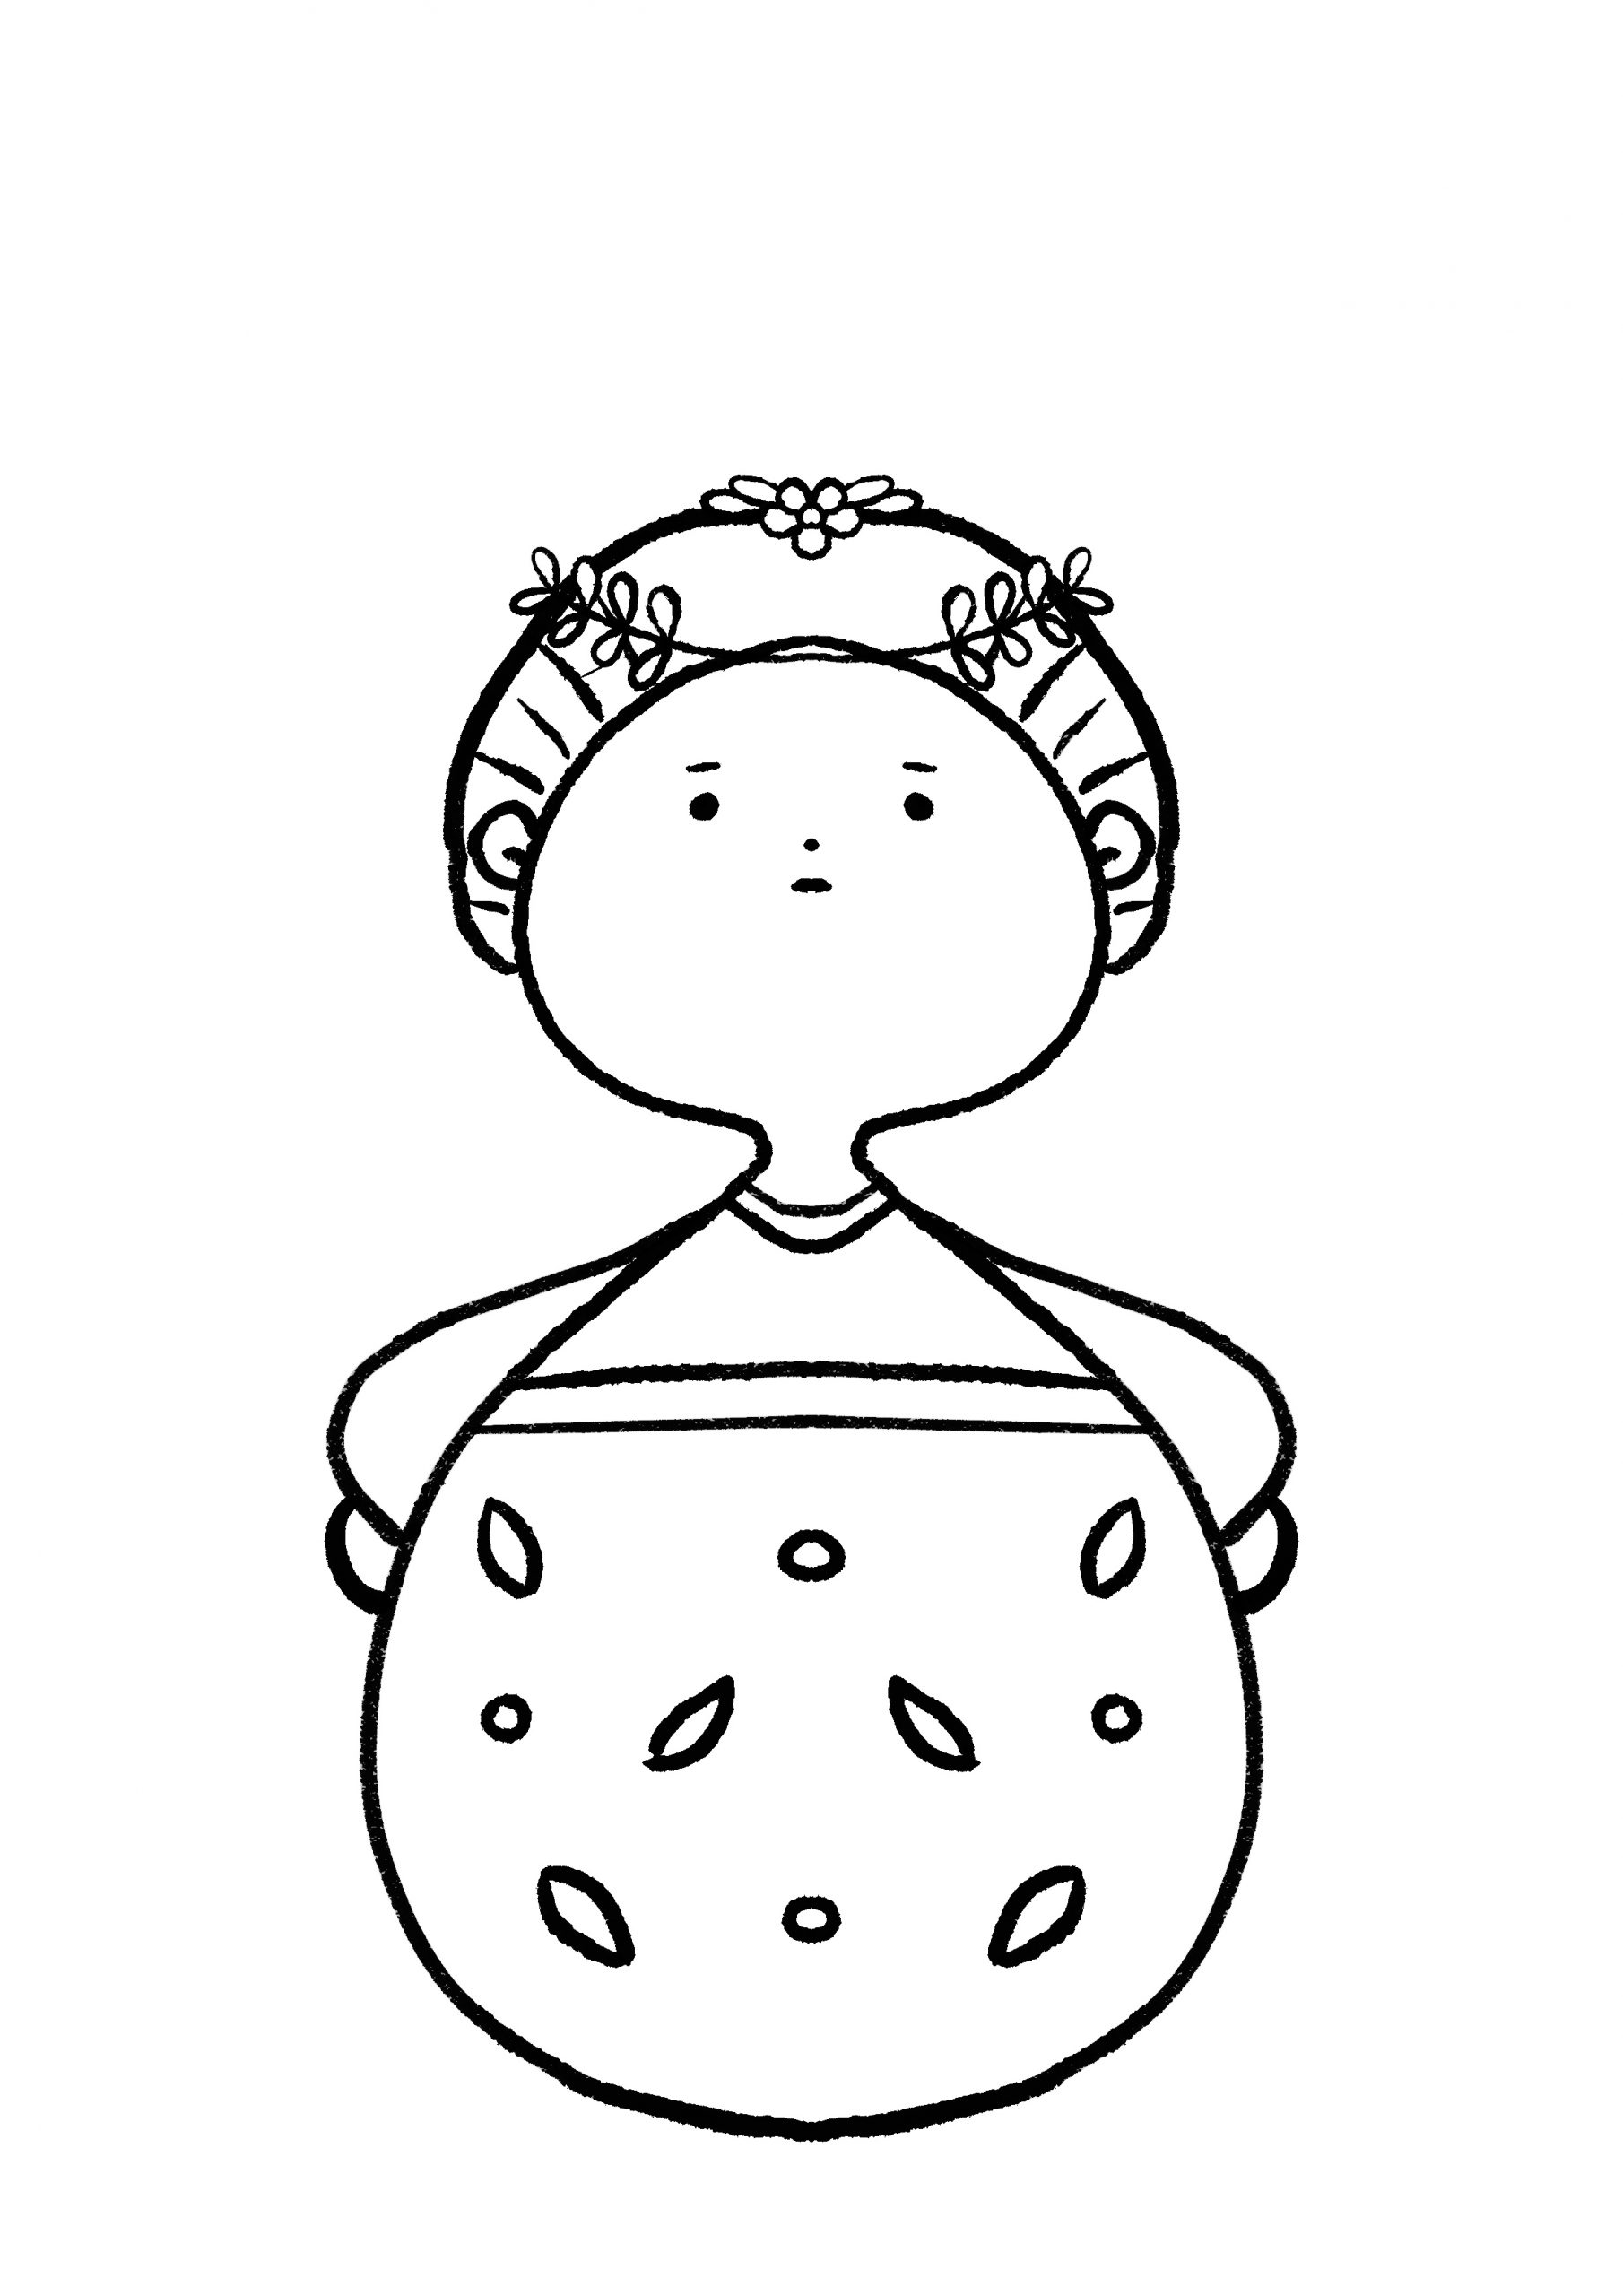 cute girl coloring page